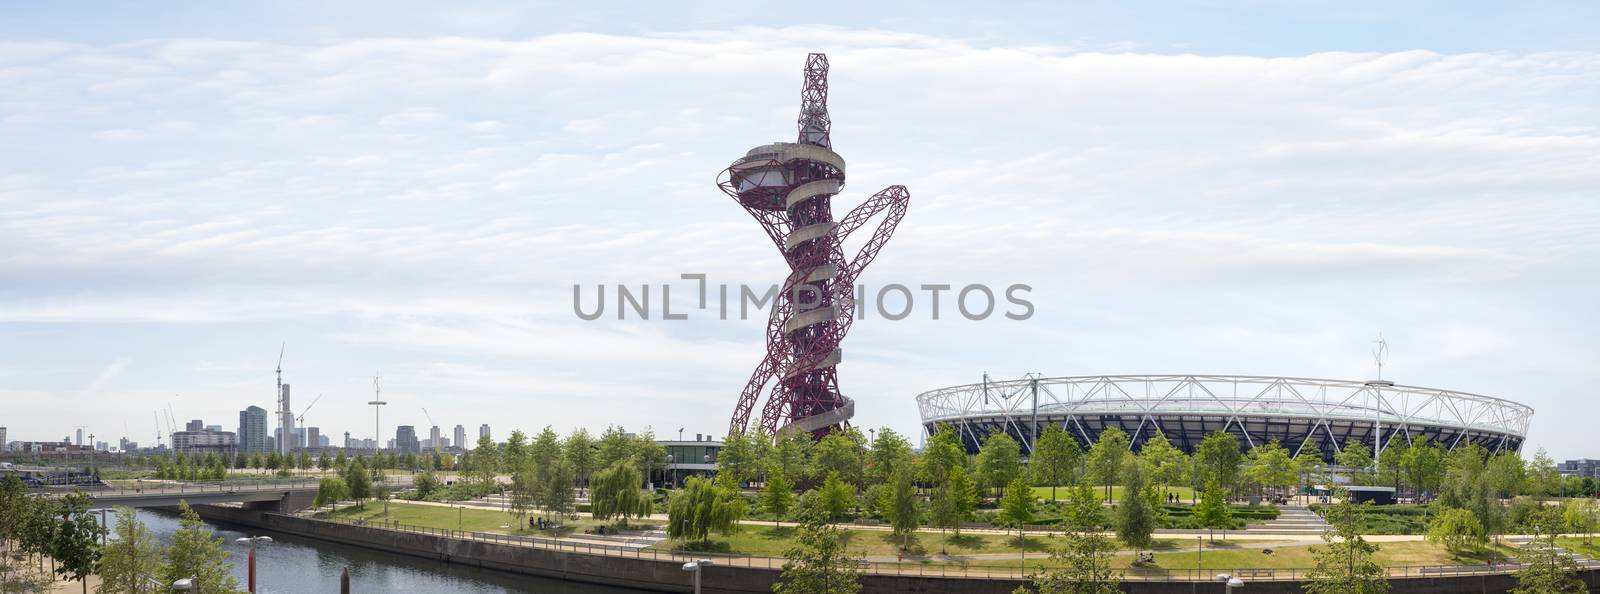 panorama of the olympic stadium and sculpture in stratford east london uk